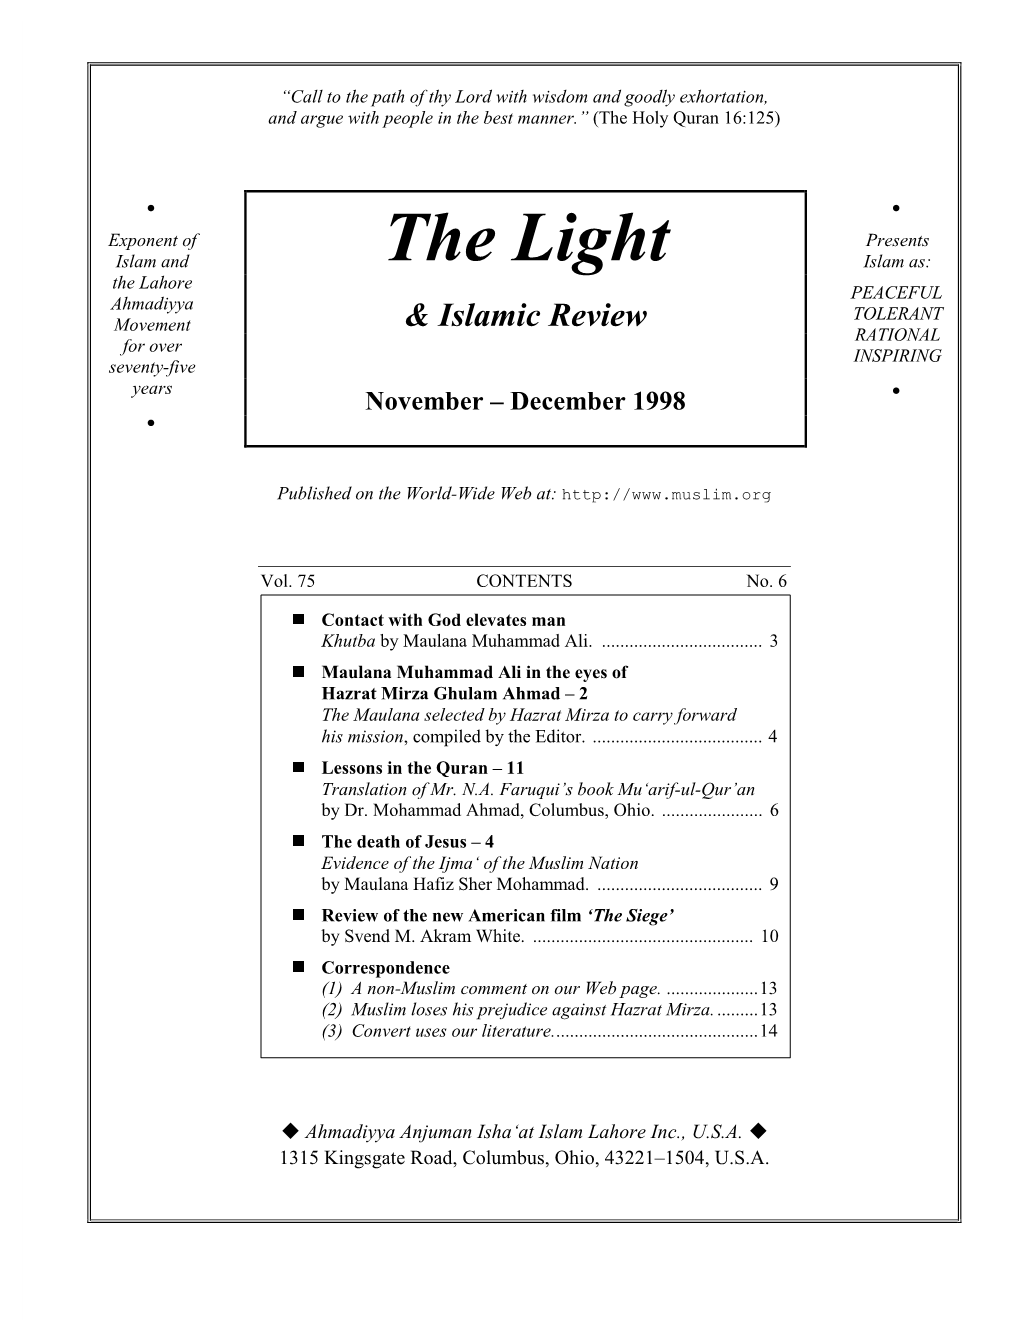 The Light Islam As: the Lahore PEACEFUL Ahmadiyya TOLERANT Movement & Islamic Review RATIONAL for Over INSPIRING Seventy-Five Years • November – December 1998 •